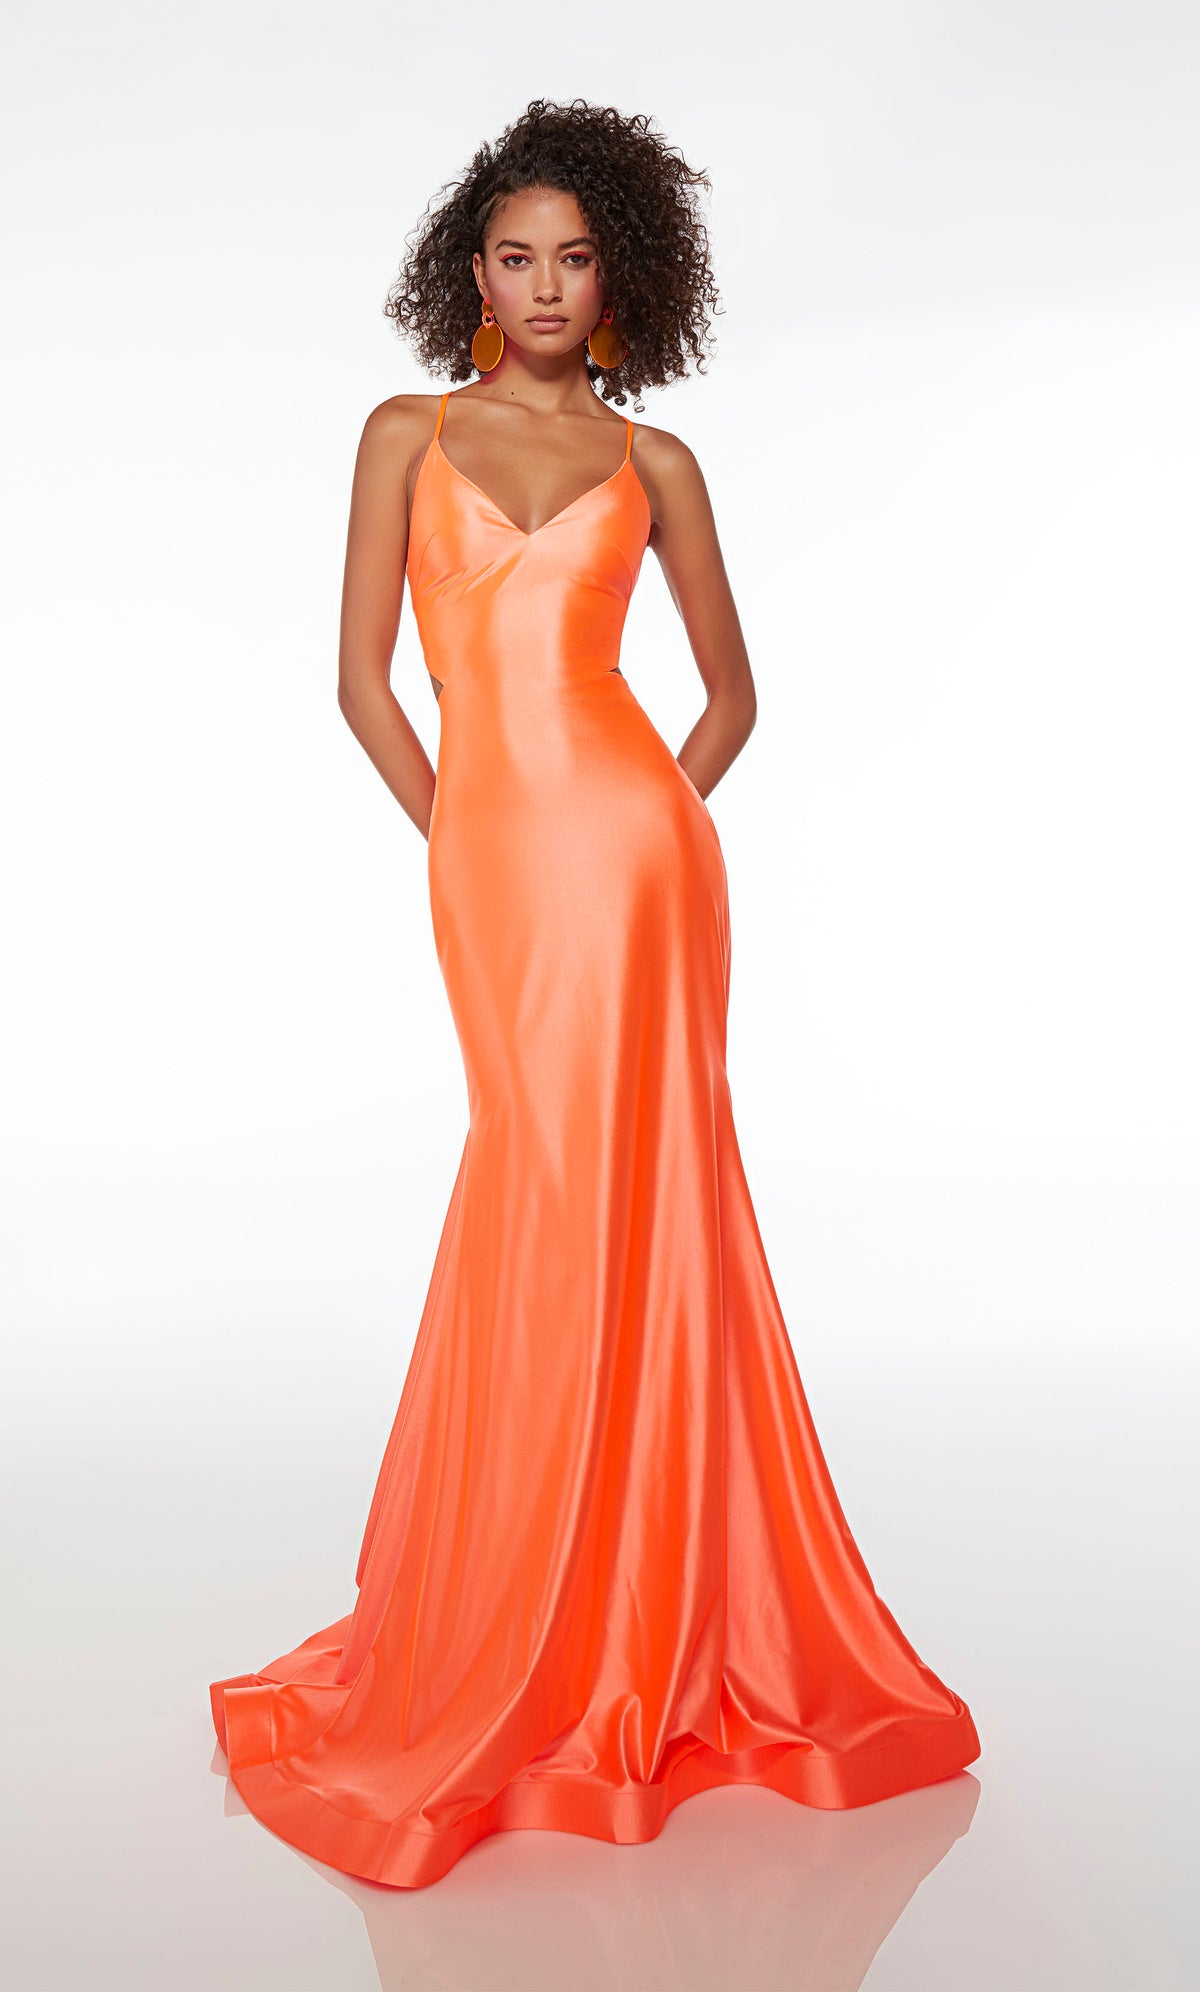 Bodycon orange prom dress in an mermaid silhouette, V neckline, side cutouts, lace-up back, ruching detail, and an long glamorous train.